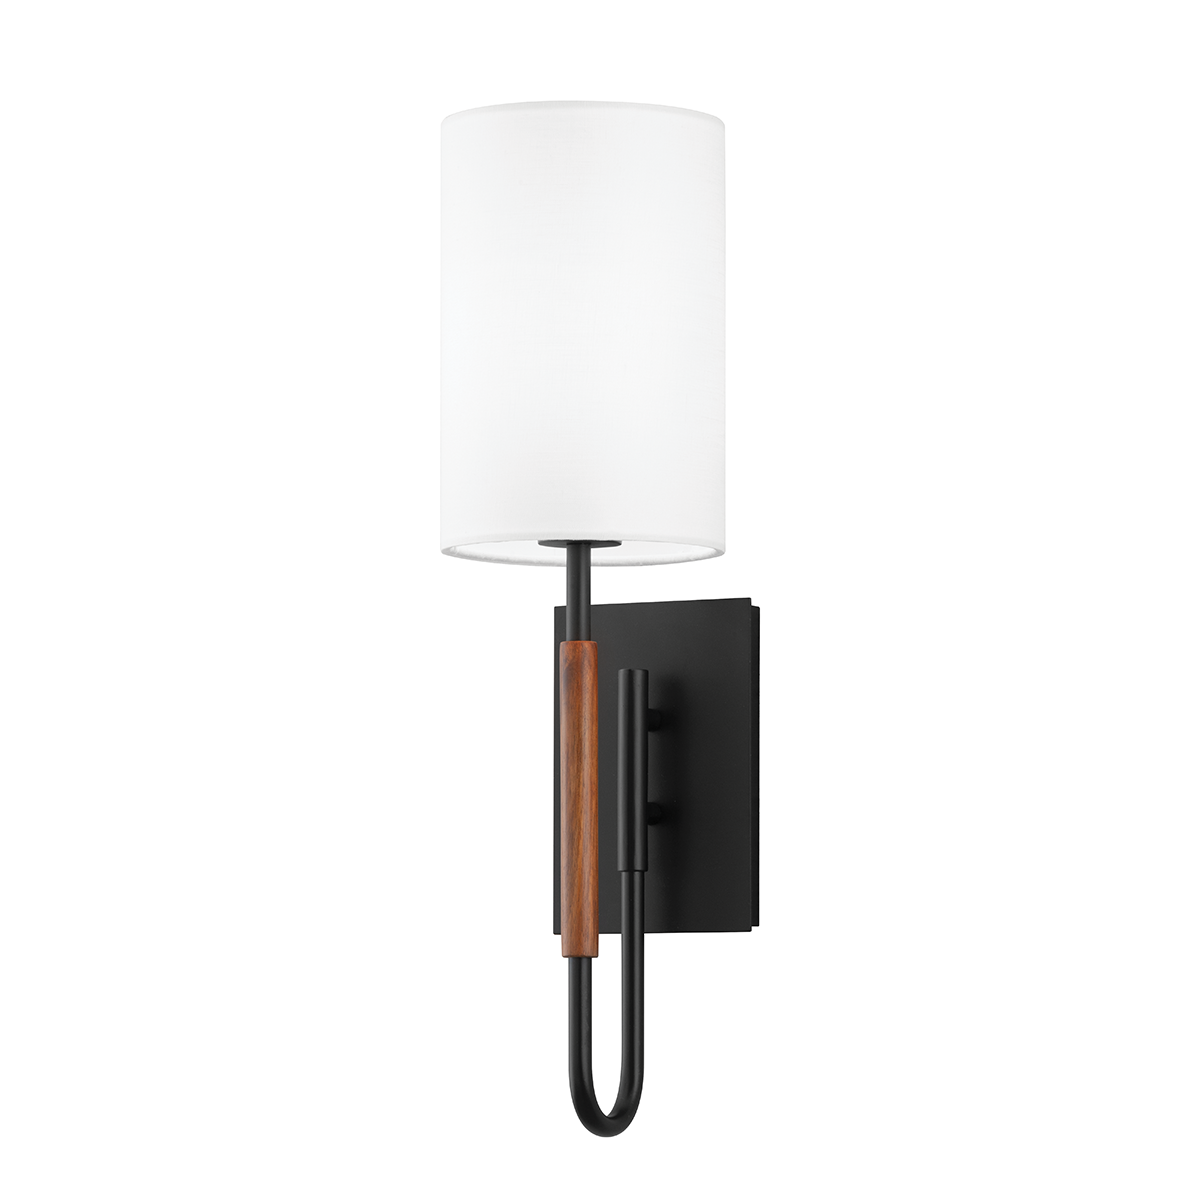 Troy Lighting Cosmo Wall Sconce Wall Sconce Troy Lighting SOFT BLACK 5.75x5.75x21 